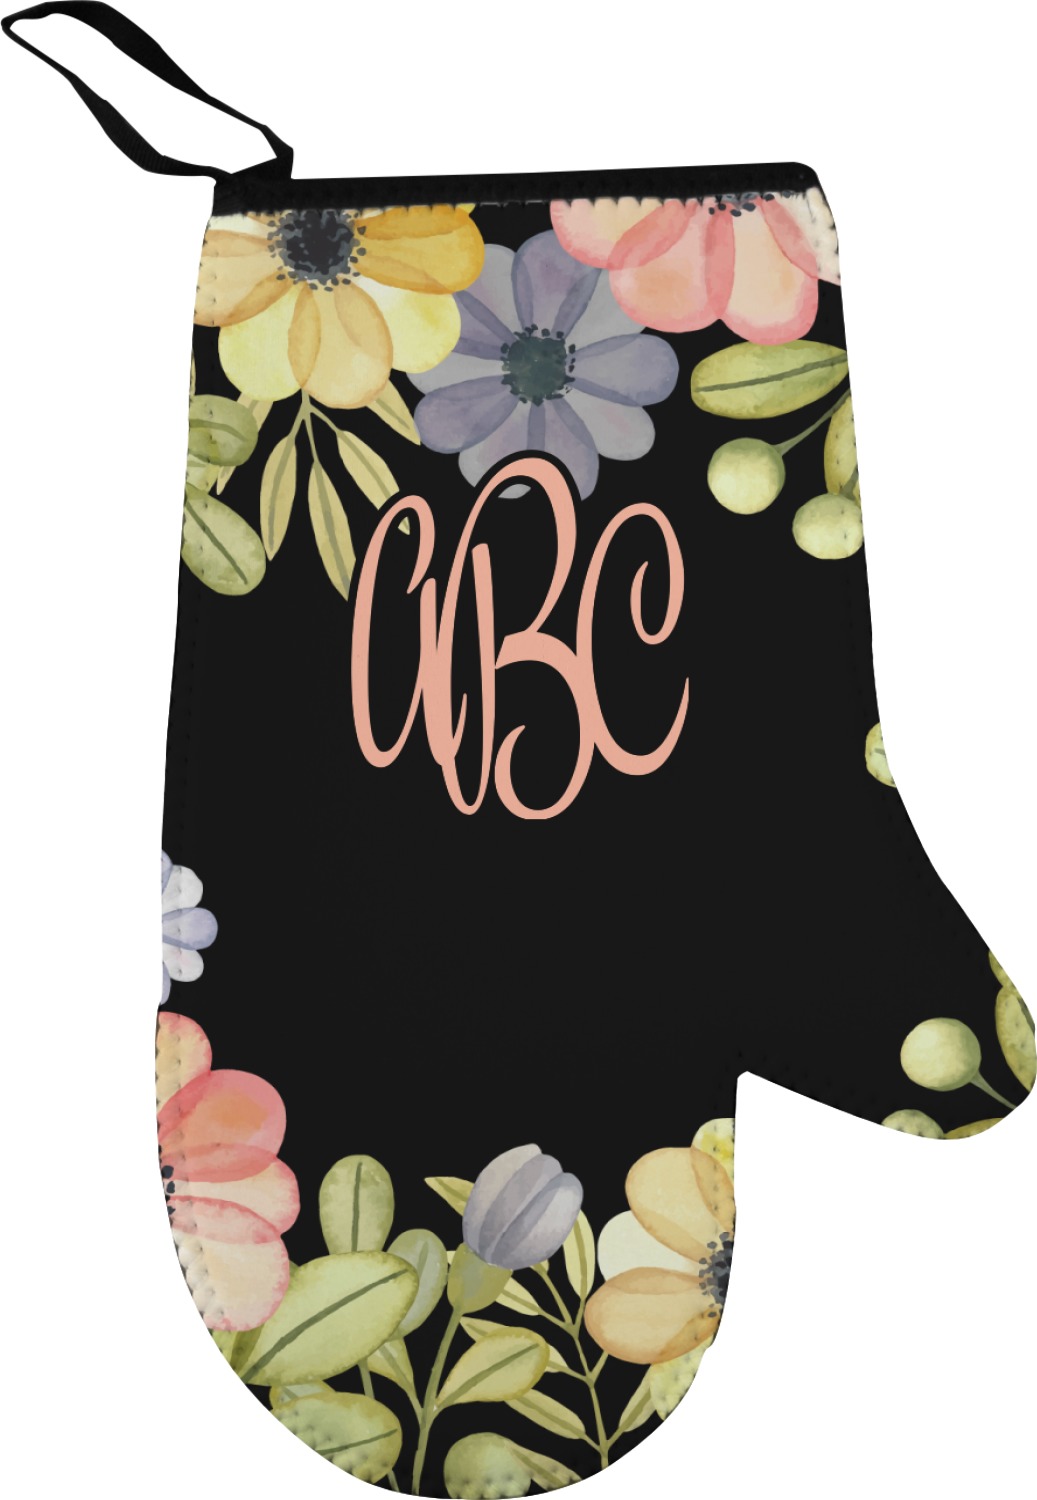 https://www.youcustomizeit.com/common/MAKE/1502980/Boho-Floral-Personalized-Oven-Mitt.jpg?lm=1555129463